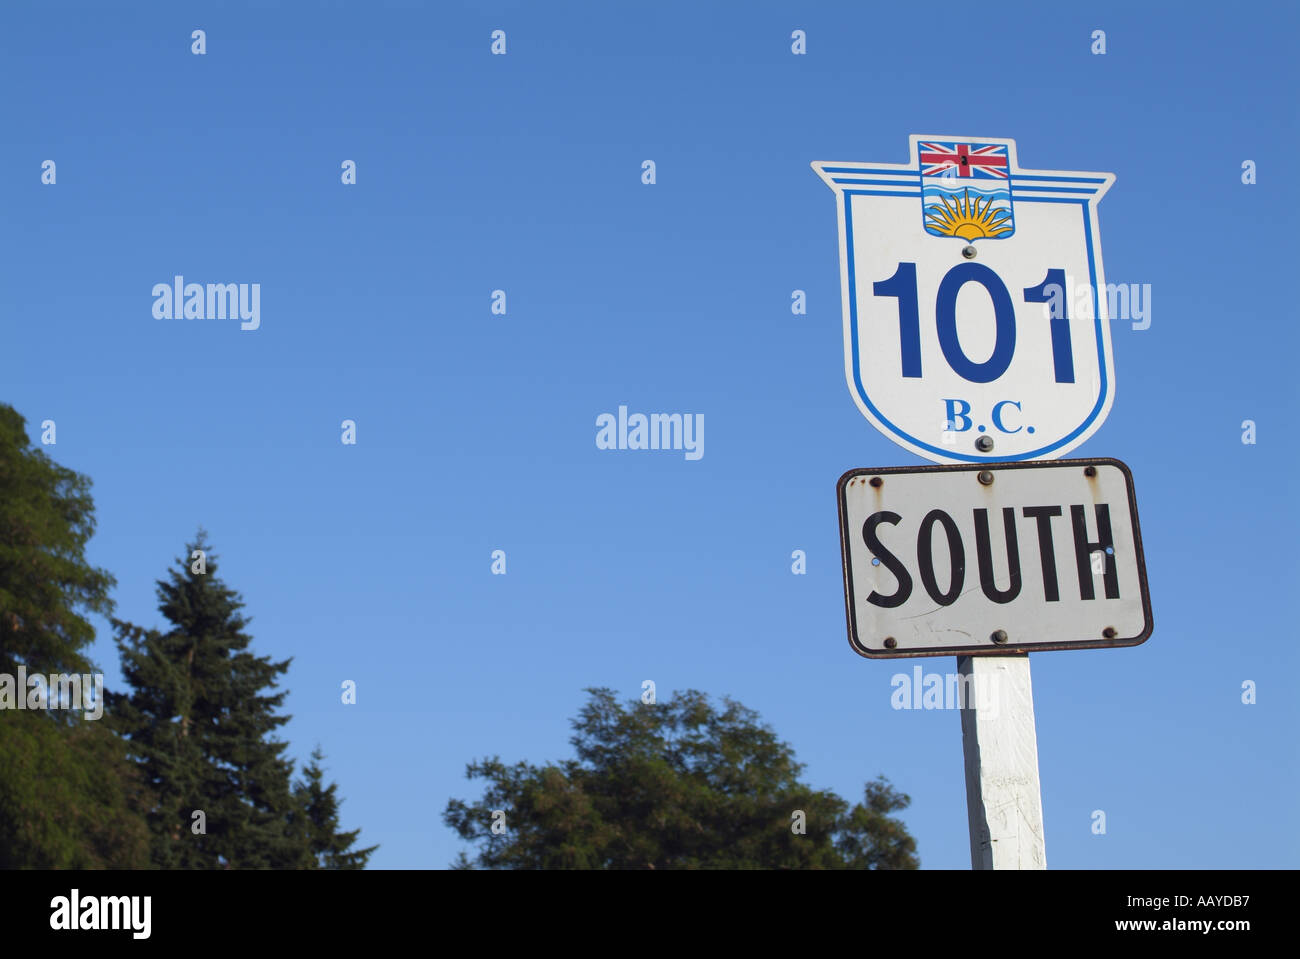 British Columbia Highway Sign 101 South Pacific Coast Highway Upper Sunshine Coast British Columbia Canada Stock Photo